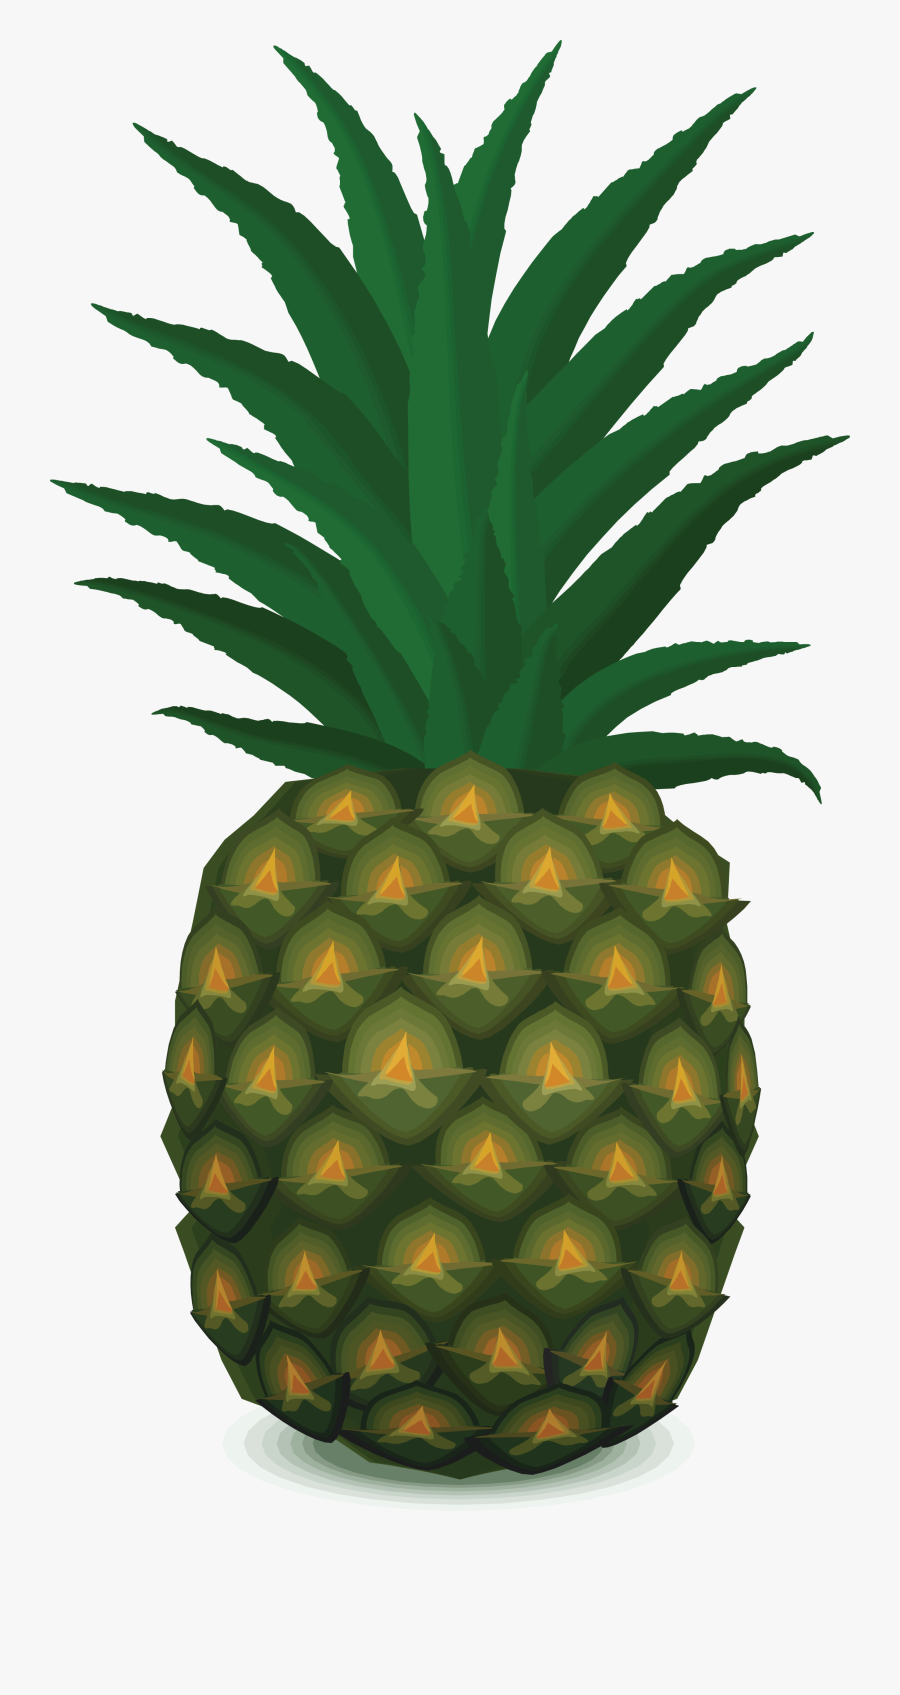 Keep Calm And Eat Pineapple, Transparent Clipart